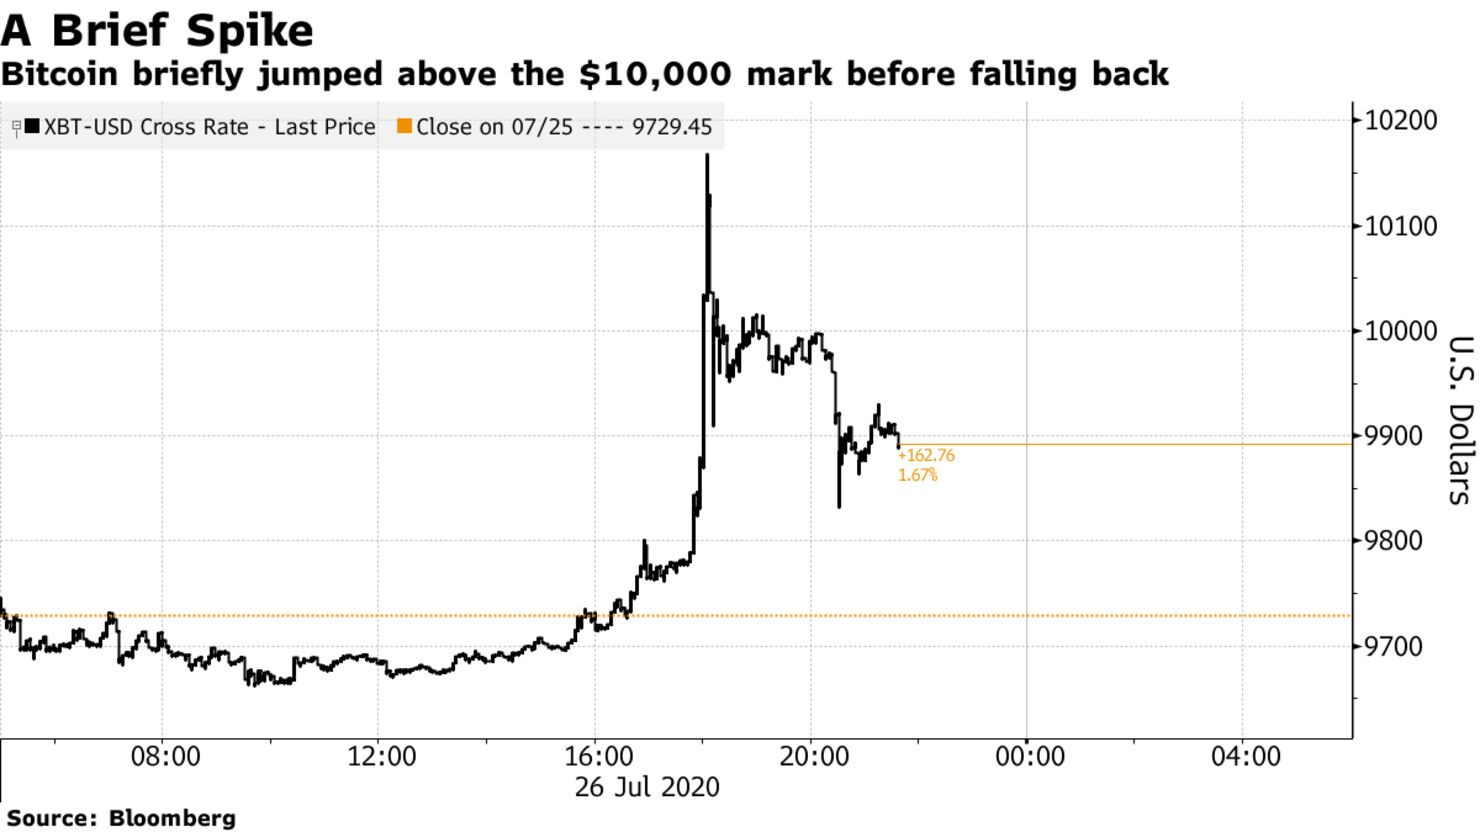 Bitcoin briefly jumped above the $10,000 mark before falling back